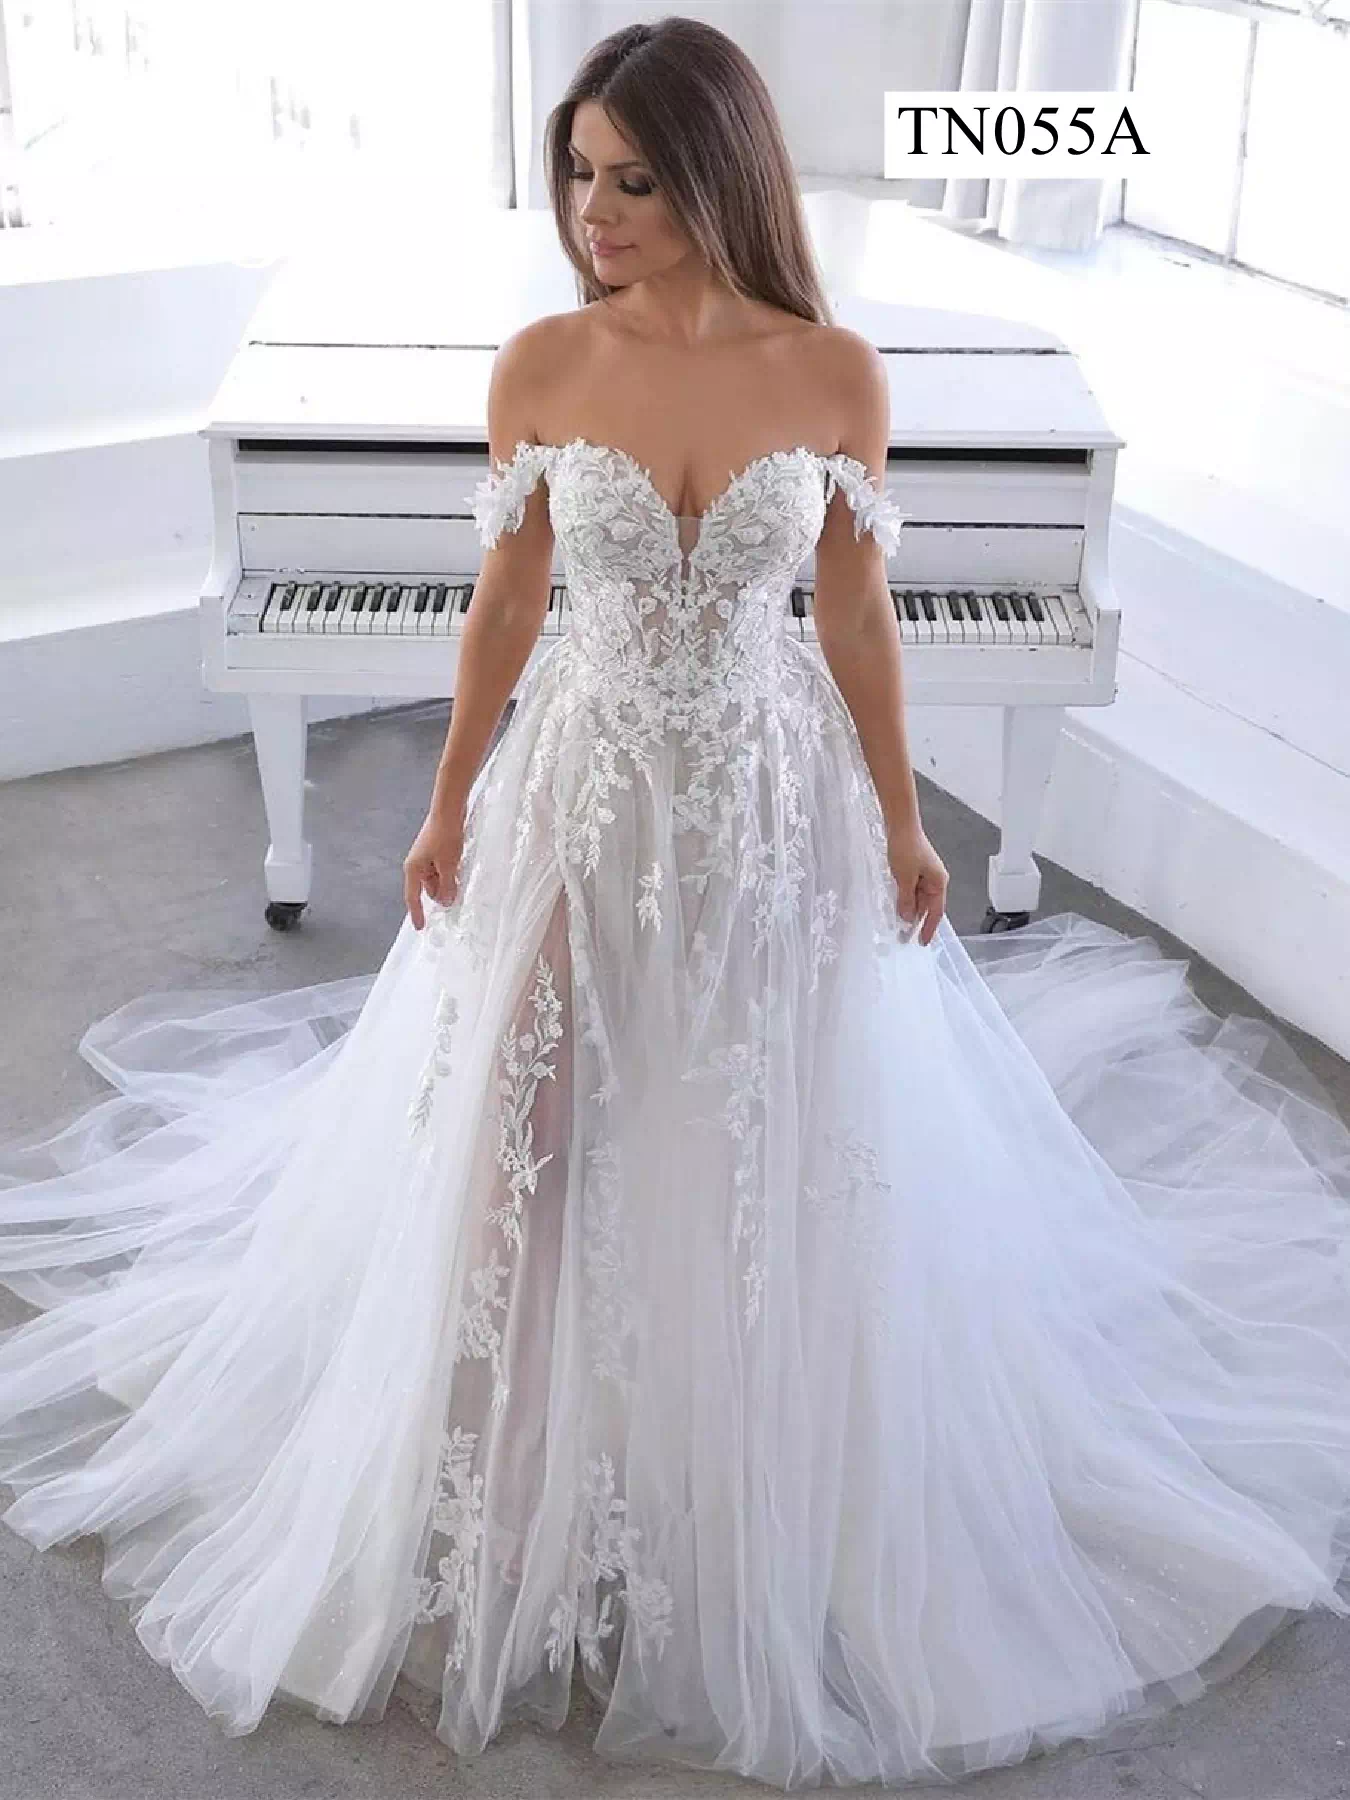 Fresh Off-Shoulder Gowns That Are Perfect For Your Engagement! | WedMeGood